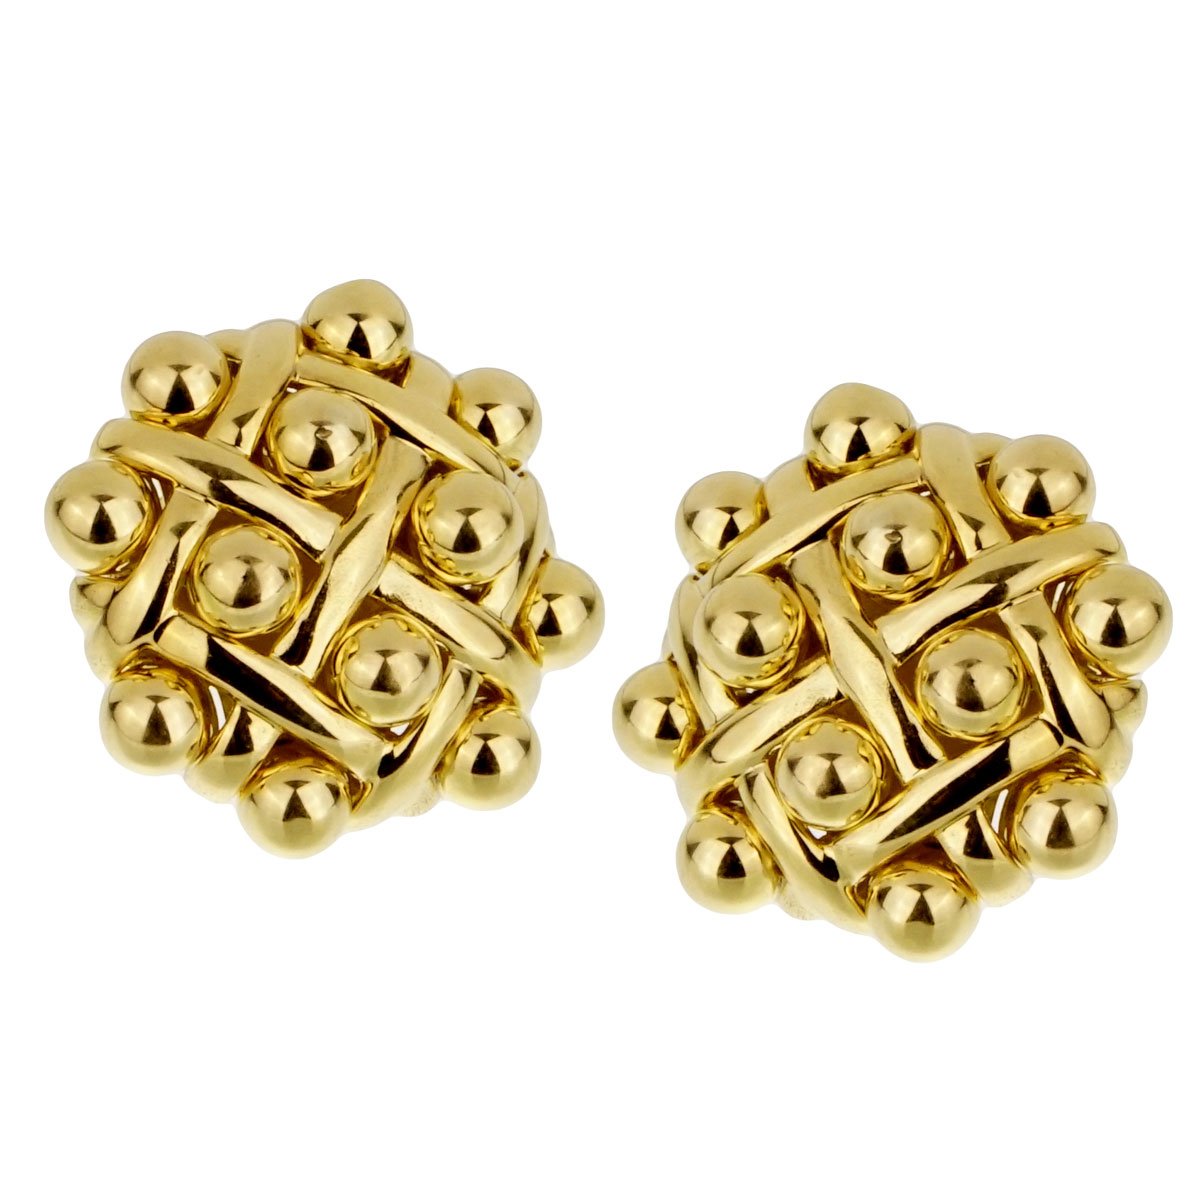 Chanel Vintage Quilted Yellow Gold Earrings